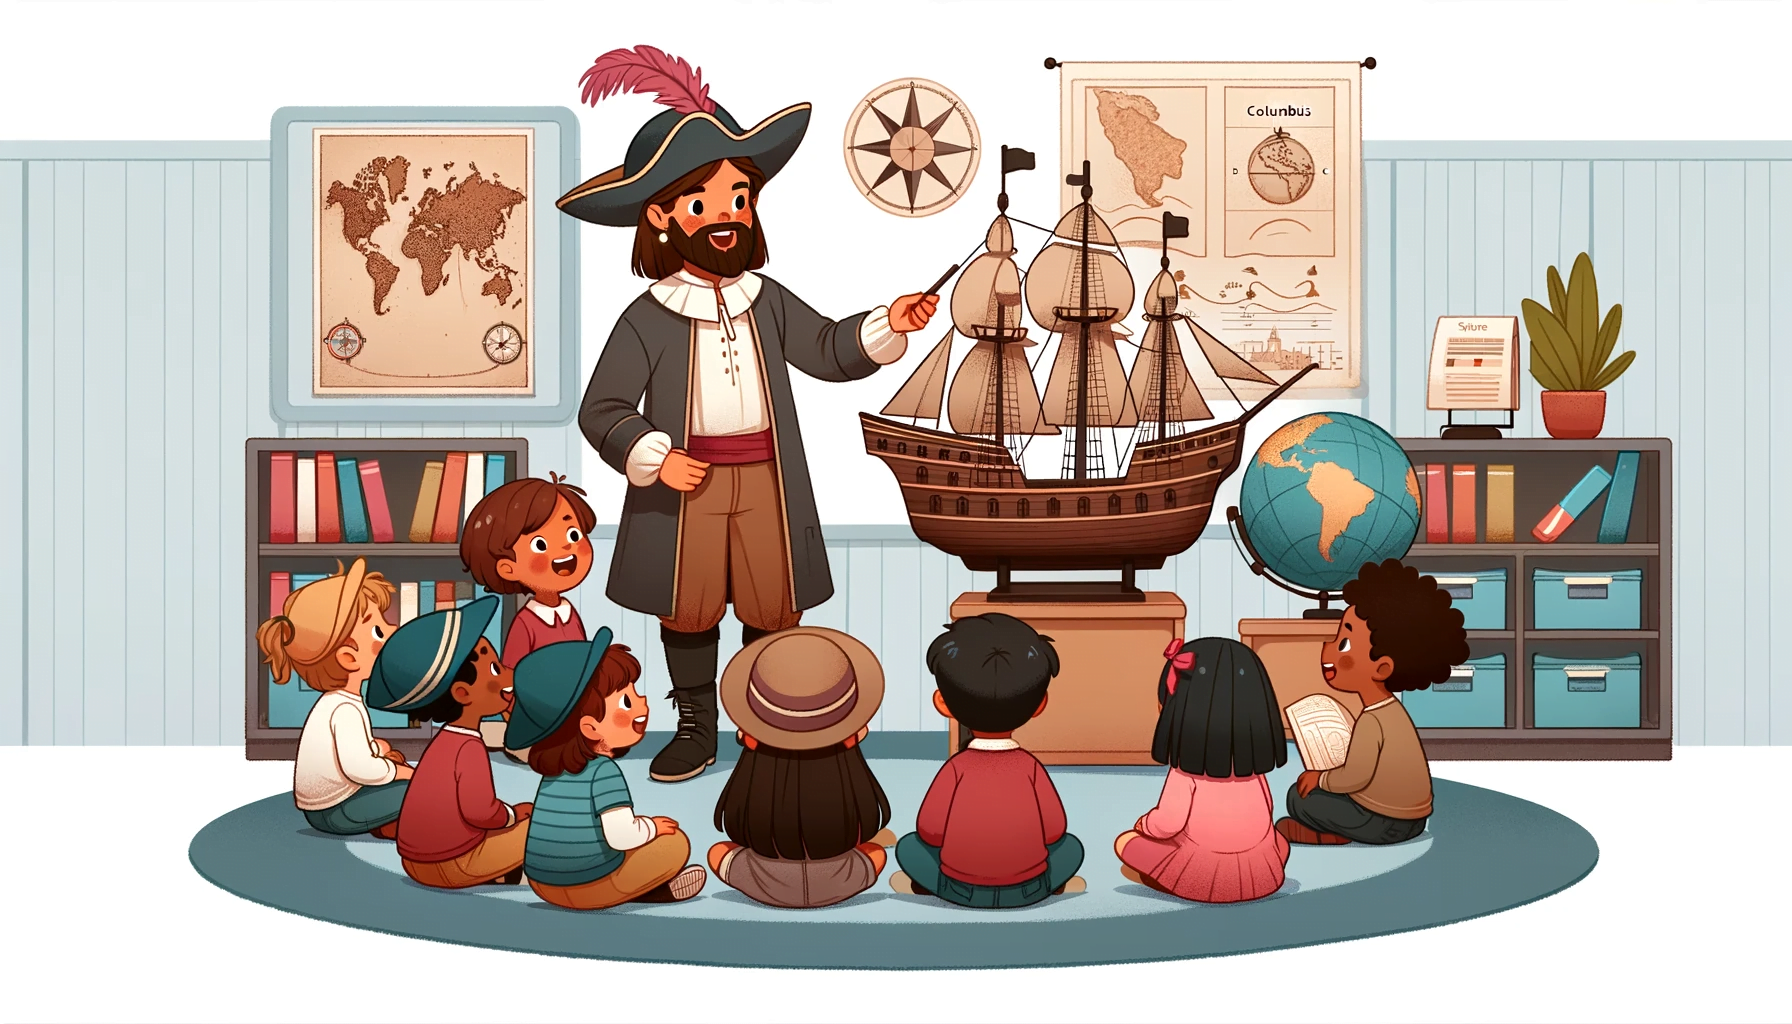 Illustration with clean and smooth line art of preschool children of diverse ethnic backgrounds in a classroom setting, with a historical theme. They are gathered around a model ship, singing and learning about explorers like Columbus. The teacher is dressed in a costume resembling that of an explorer from the Age of Discovery, pointing to a globe and nautical maps on the wall. The children are engaged and curious, some wearing paper tricorn hats.